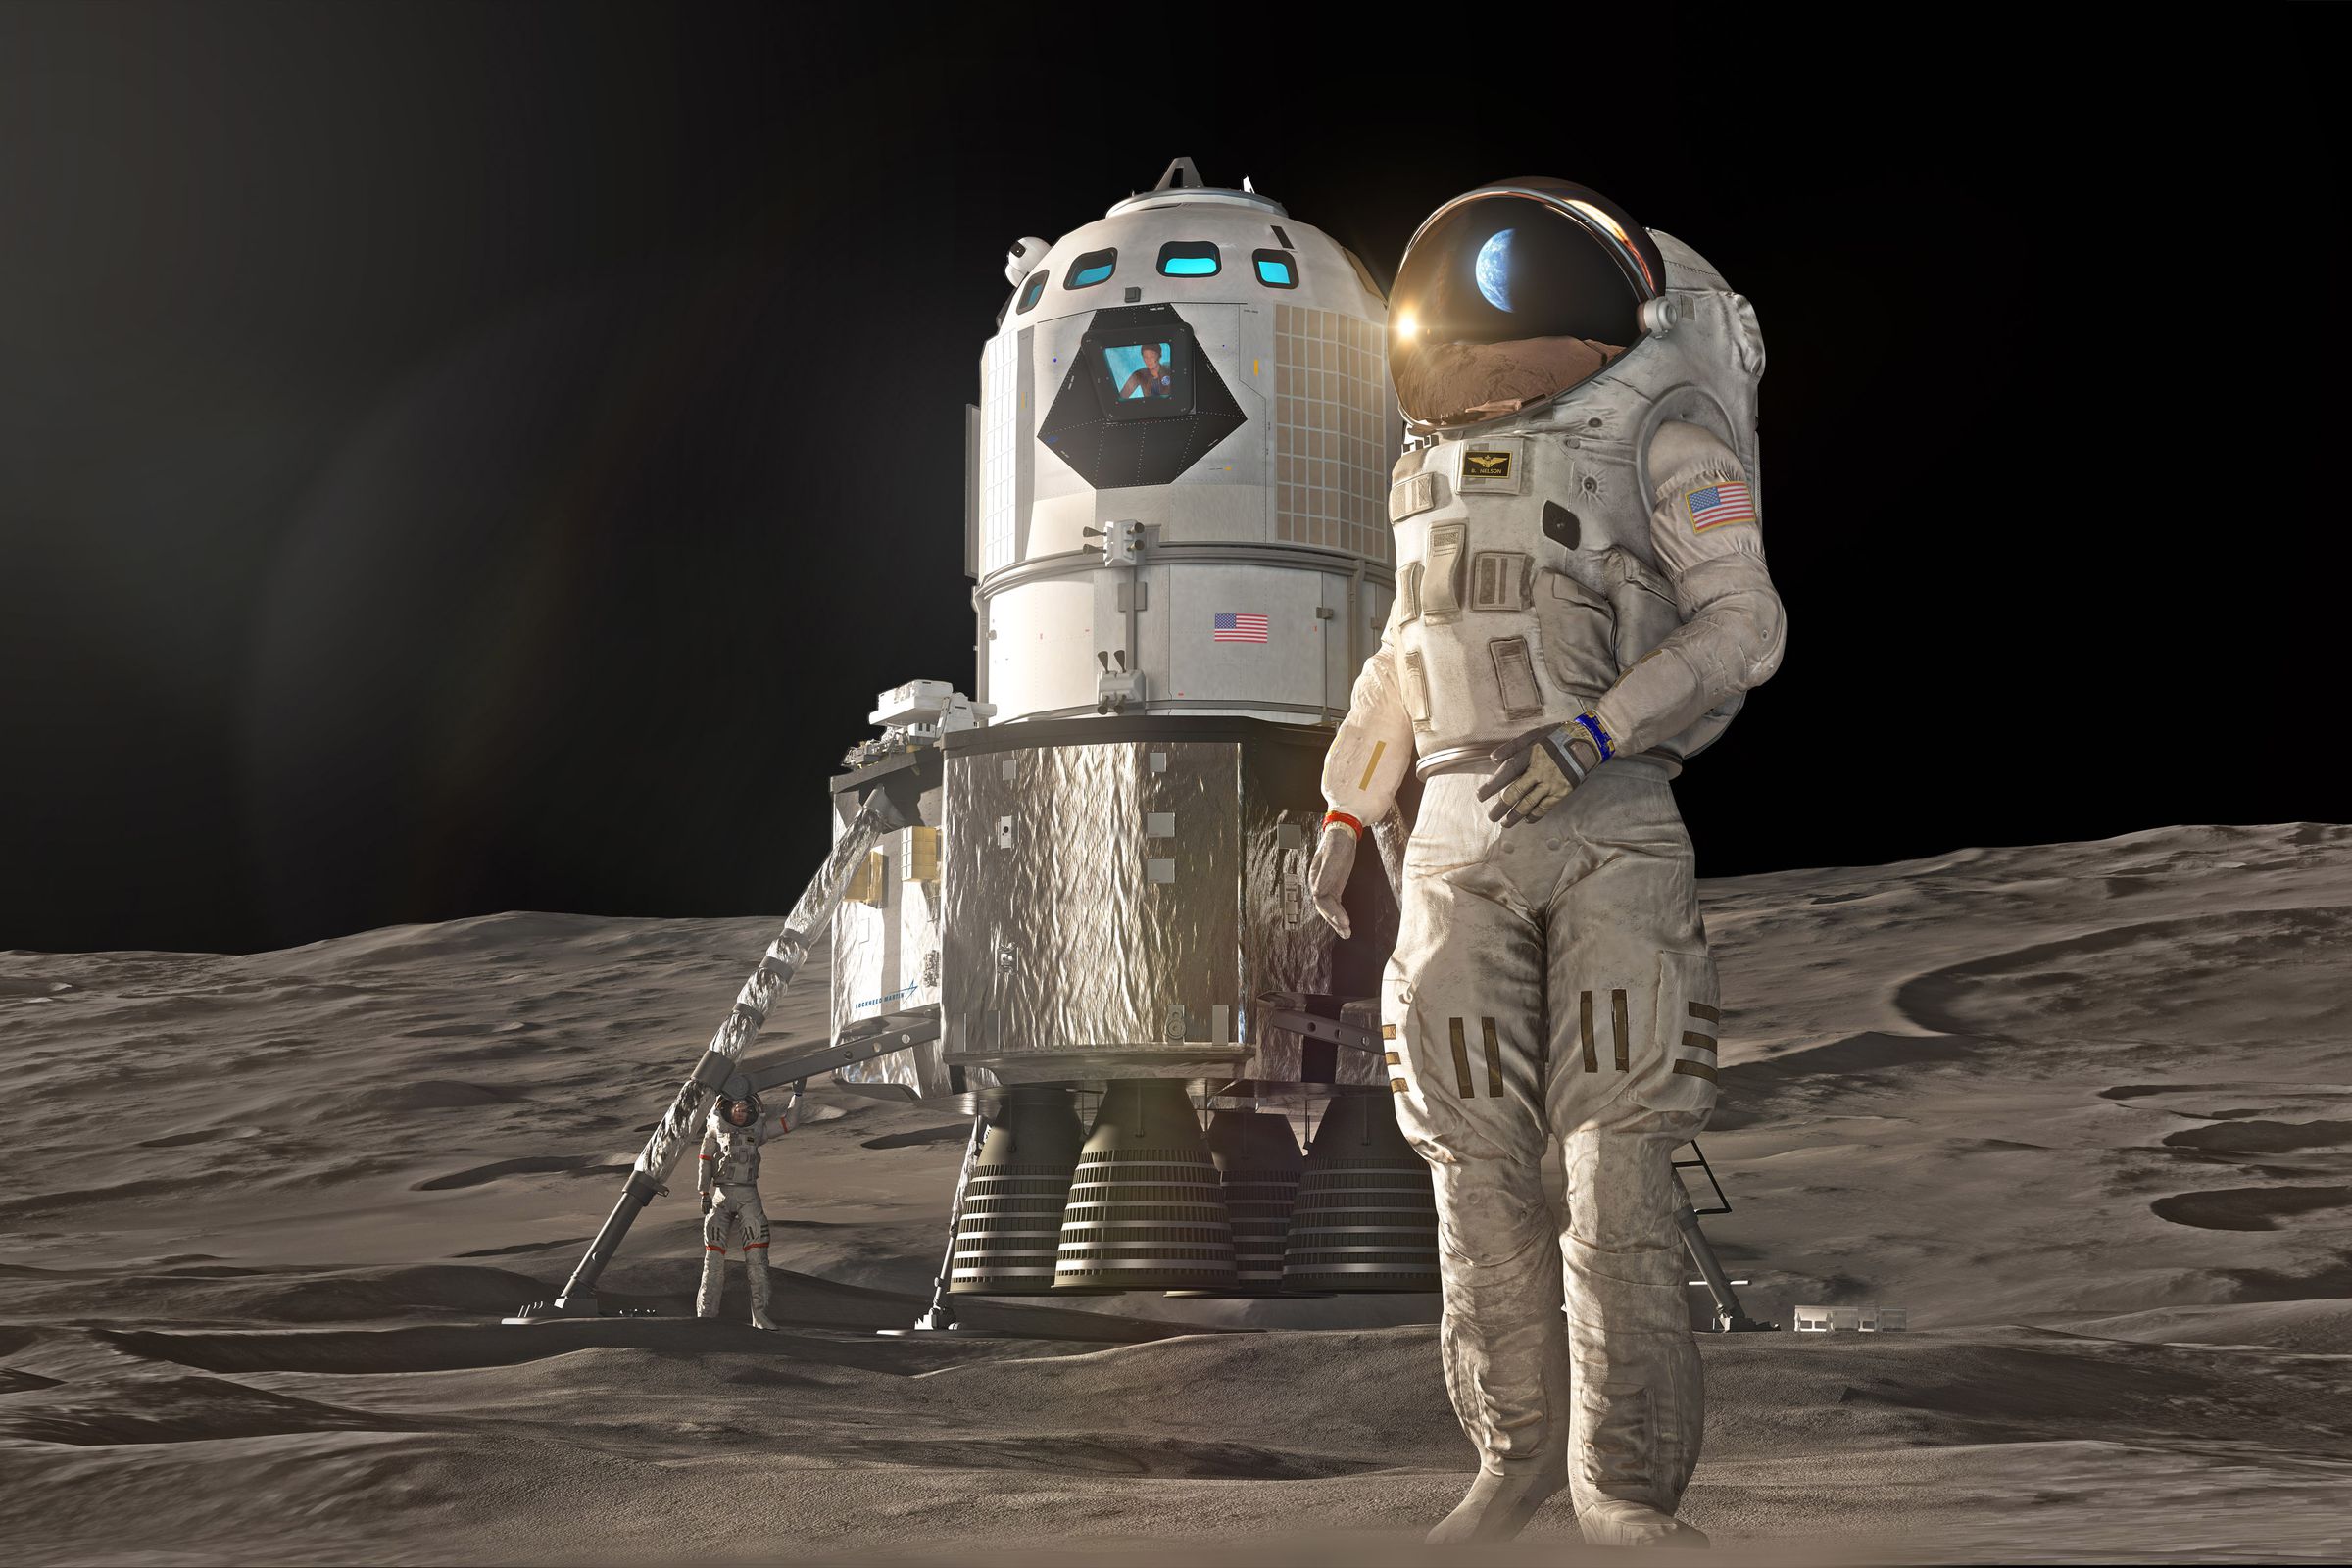 An artistic rendering of Lockheed Martin’s lunar landing concept that can supposedly get astronauts to the lunar surface by 2024